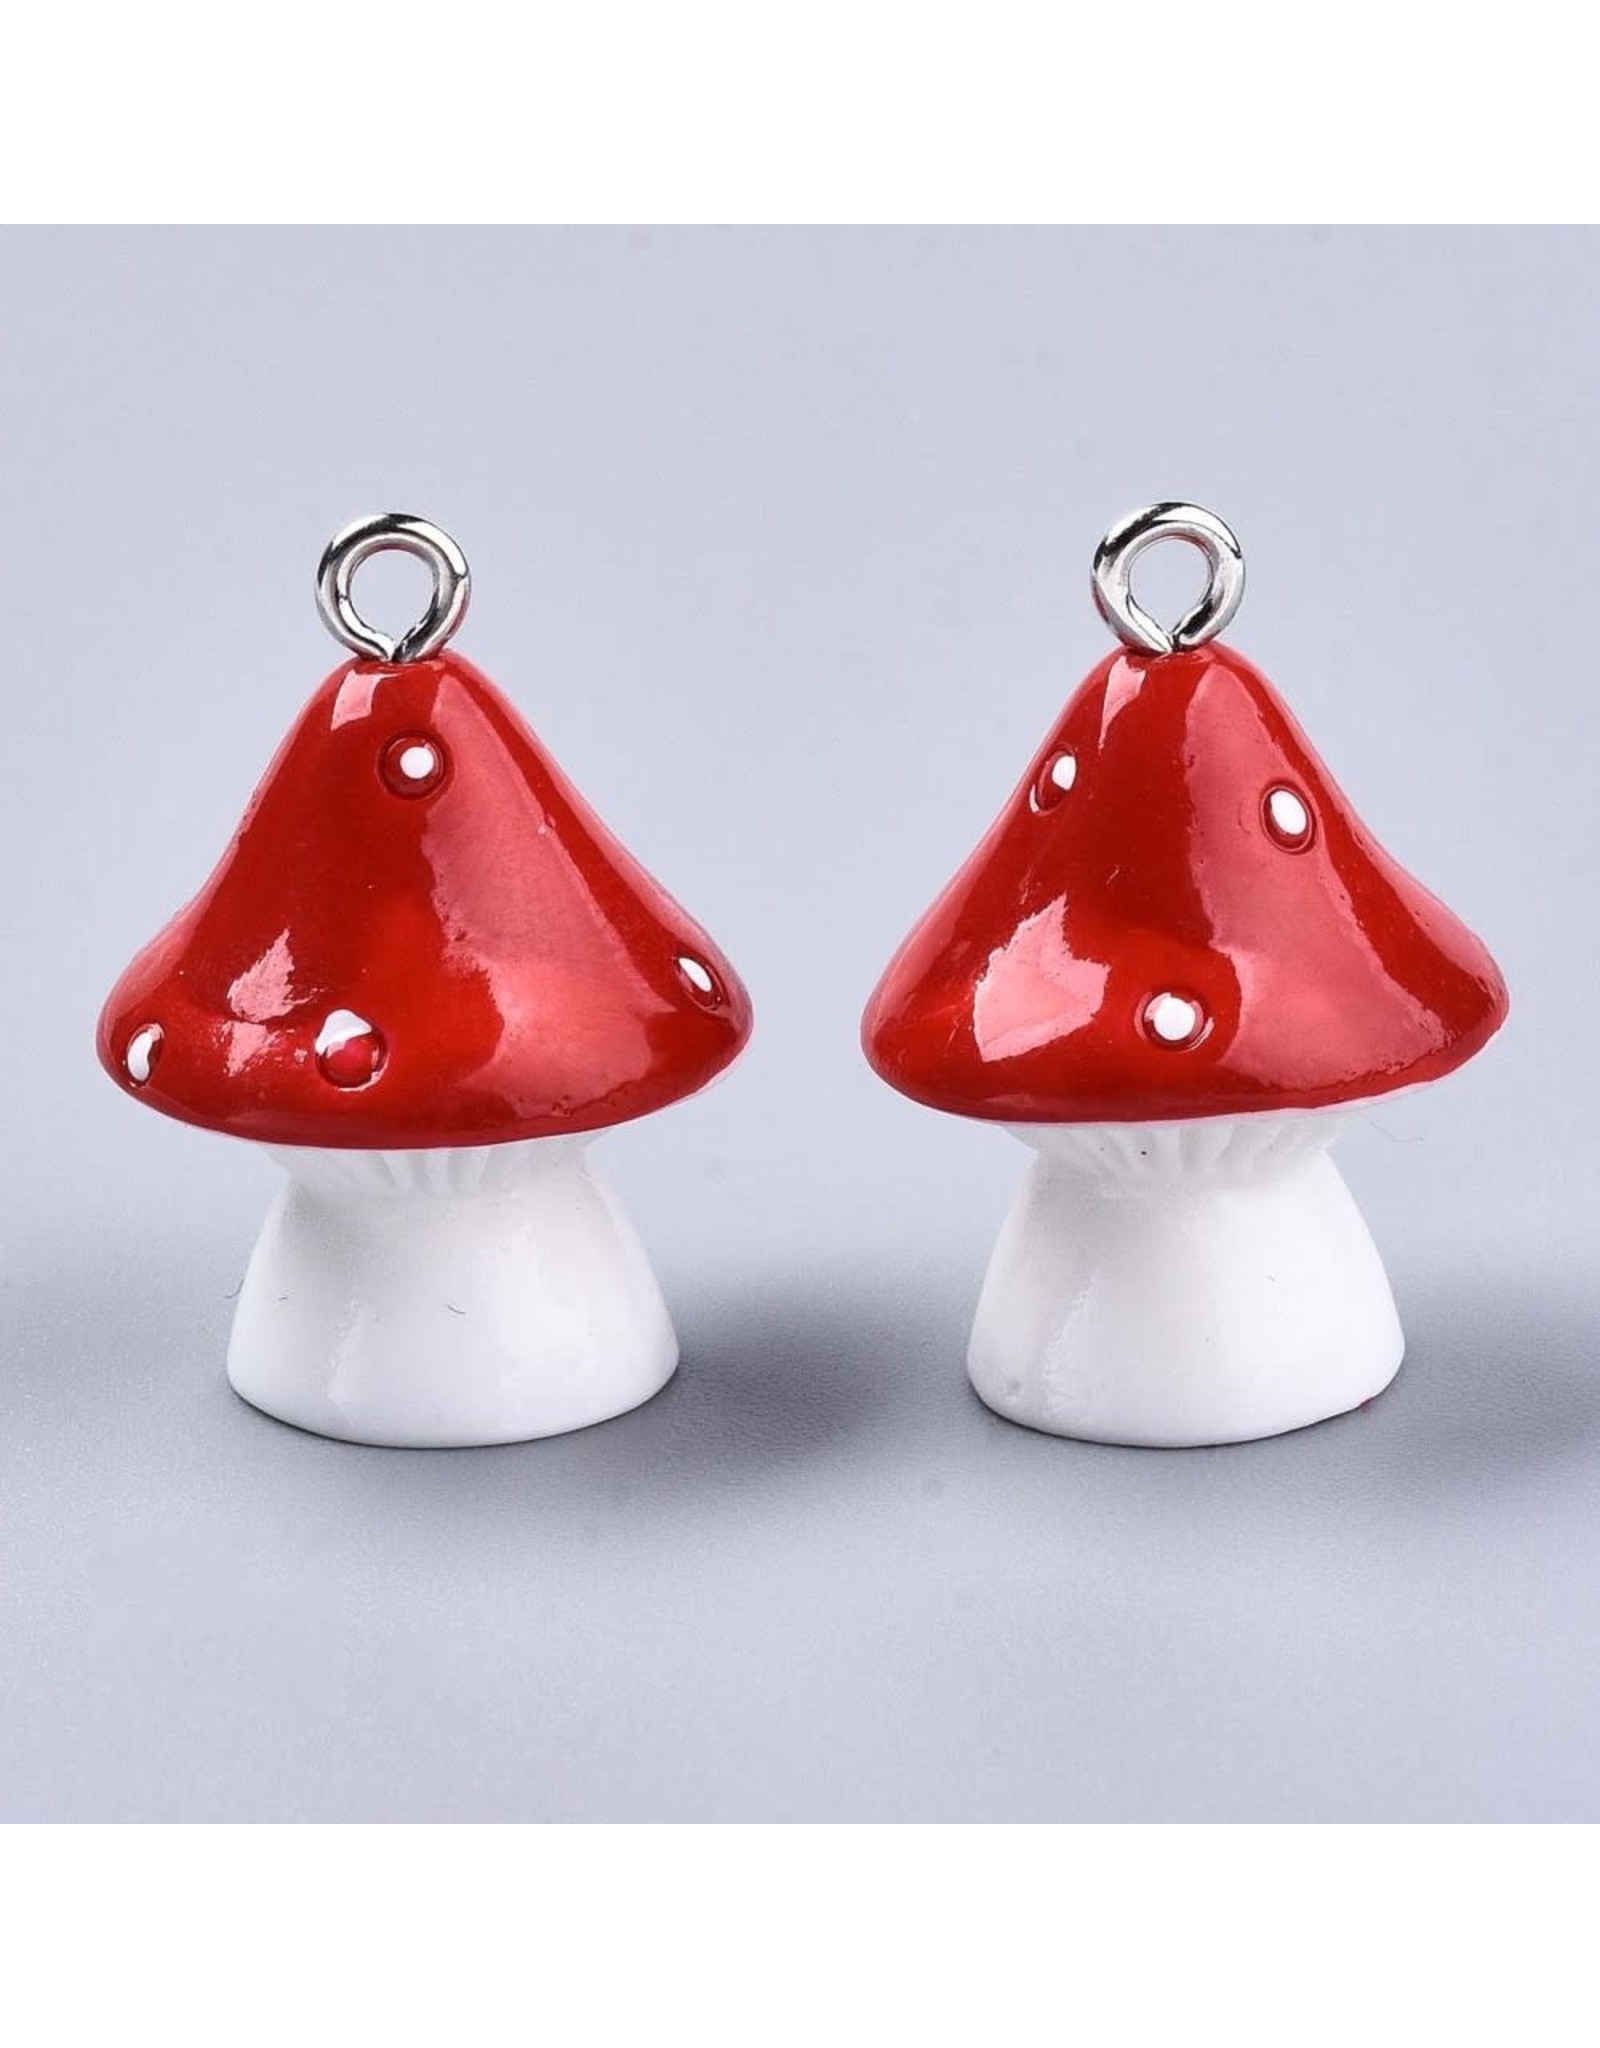 Resin Mushroom  Red and White 24x17mm  x6